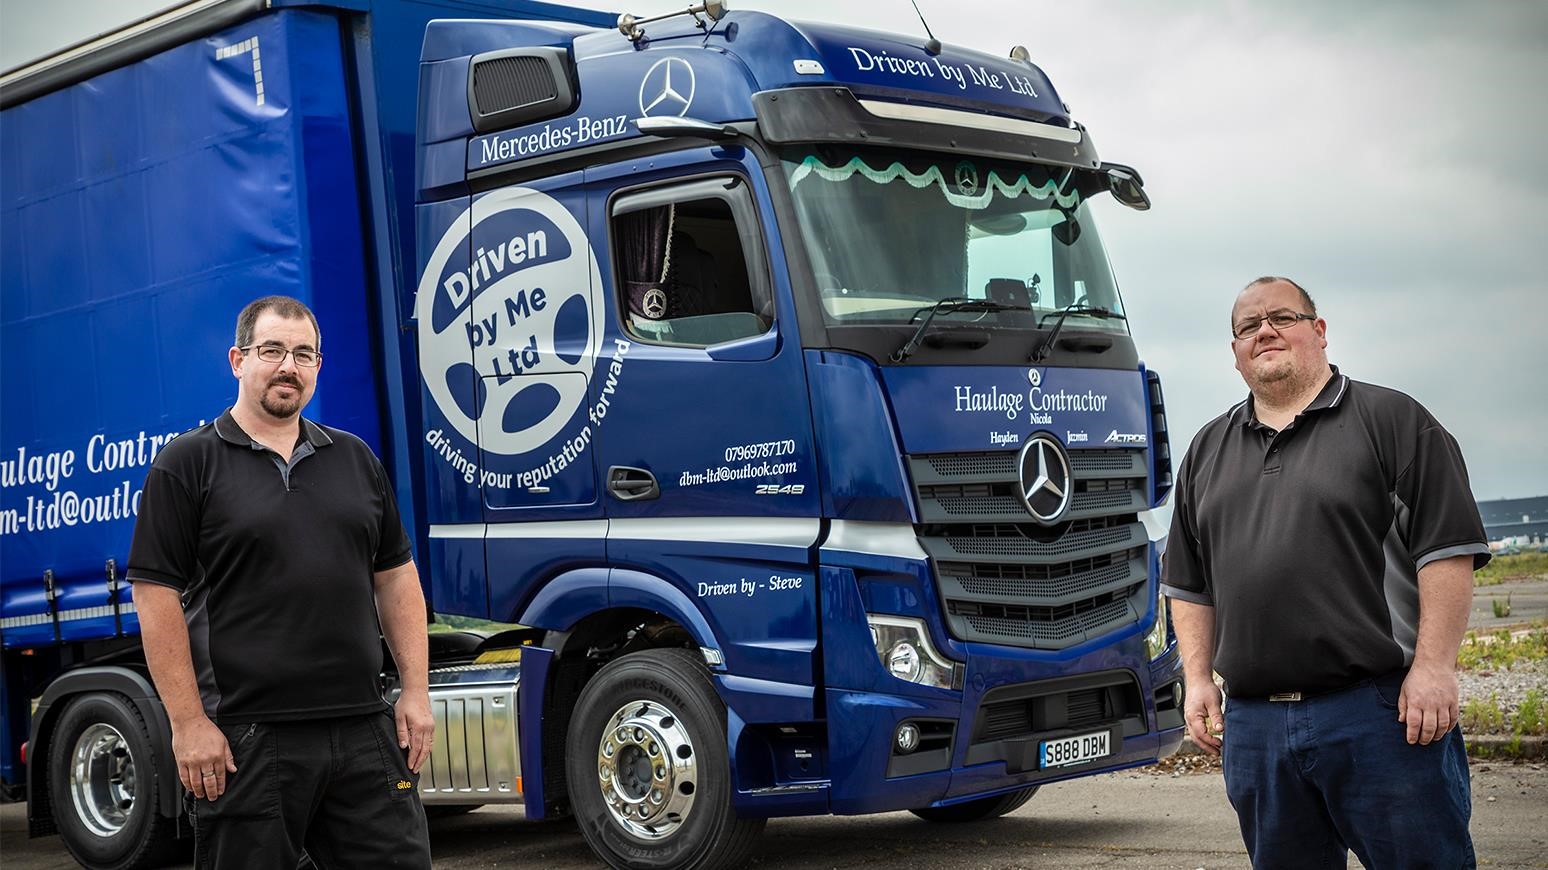 Driven By Me Adds New Mercedes-Benz Actros 2548 Tractor Unit For Efficiency & Advanced Technologies